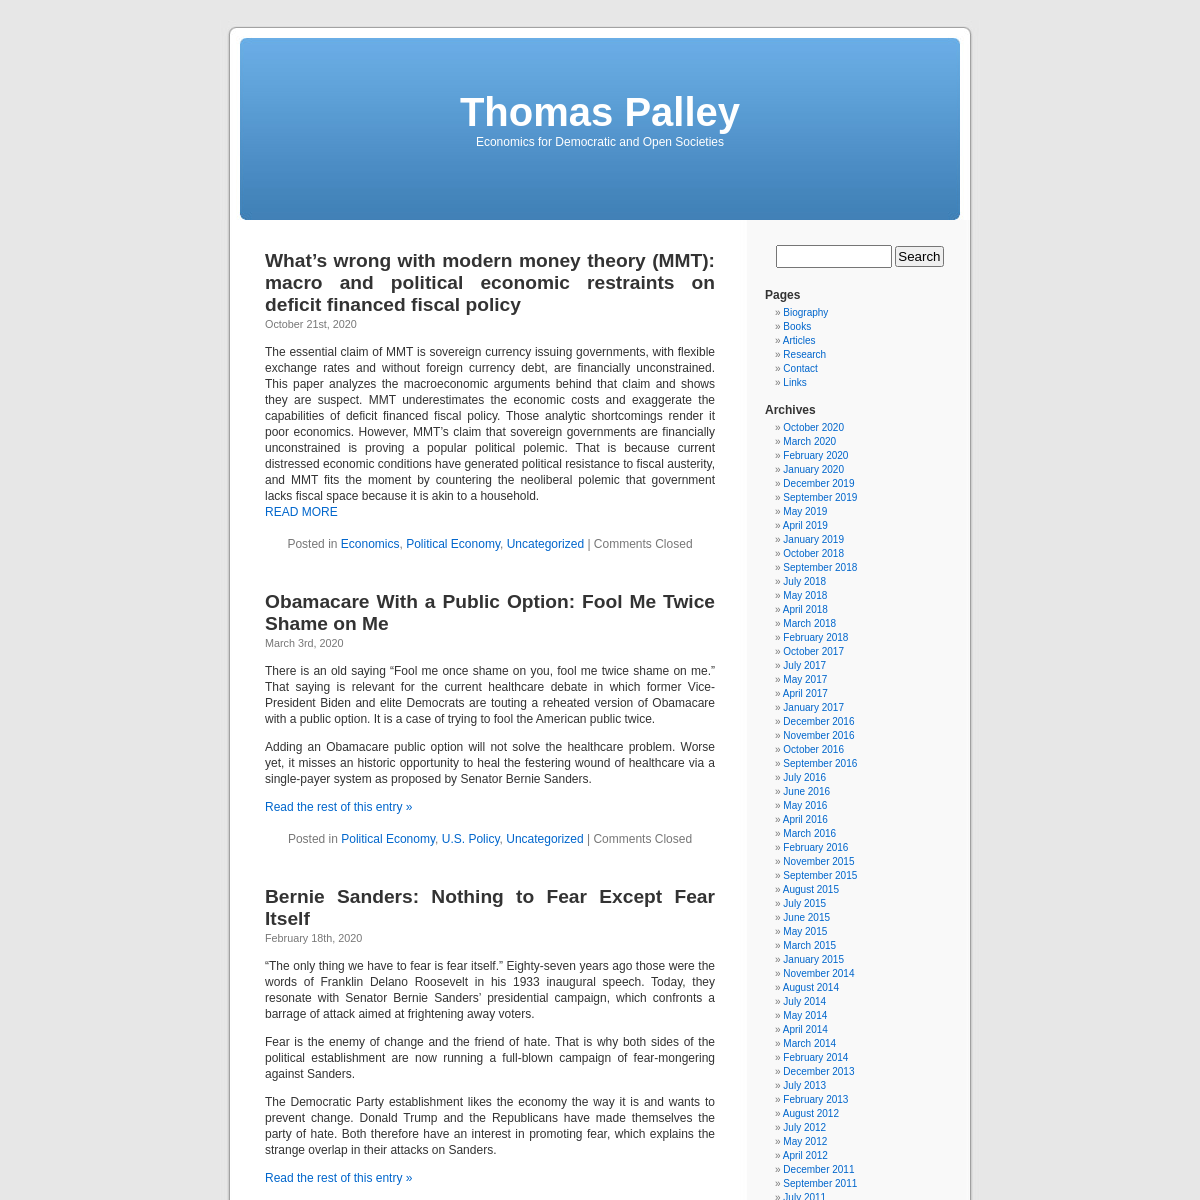 A complete backup of thomaspalley.com